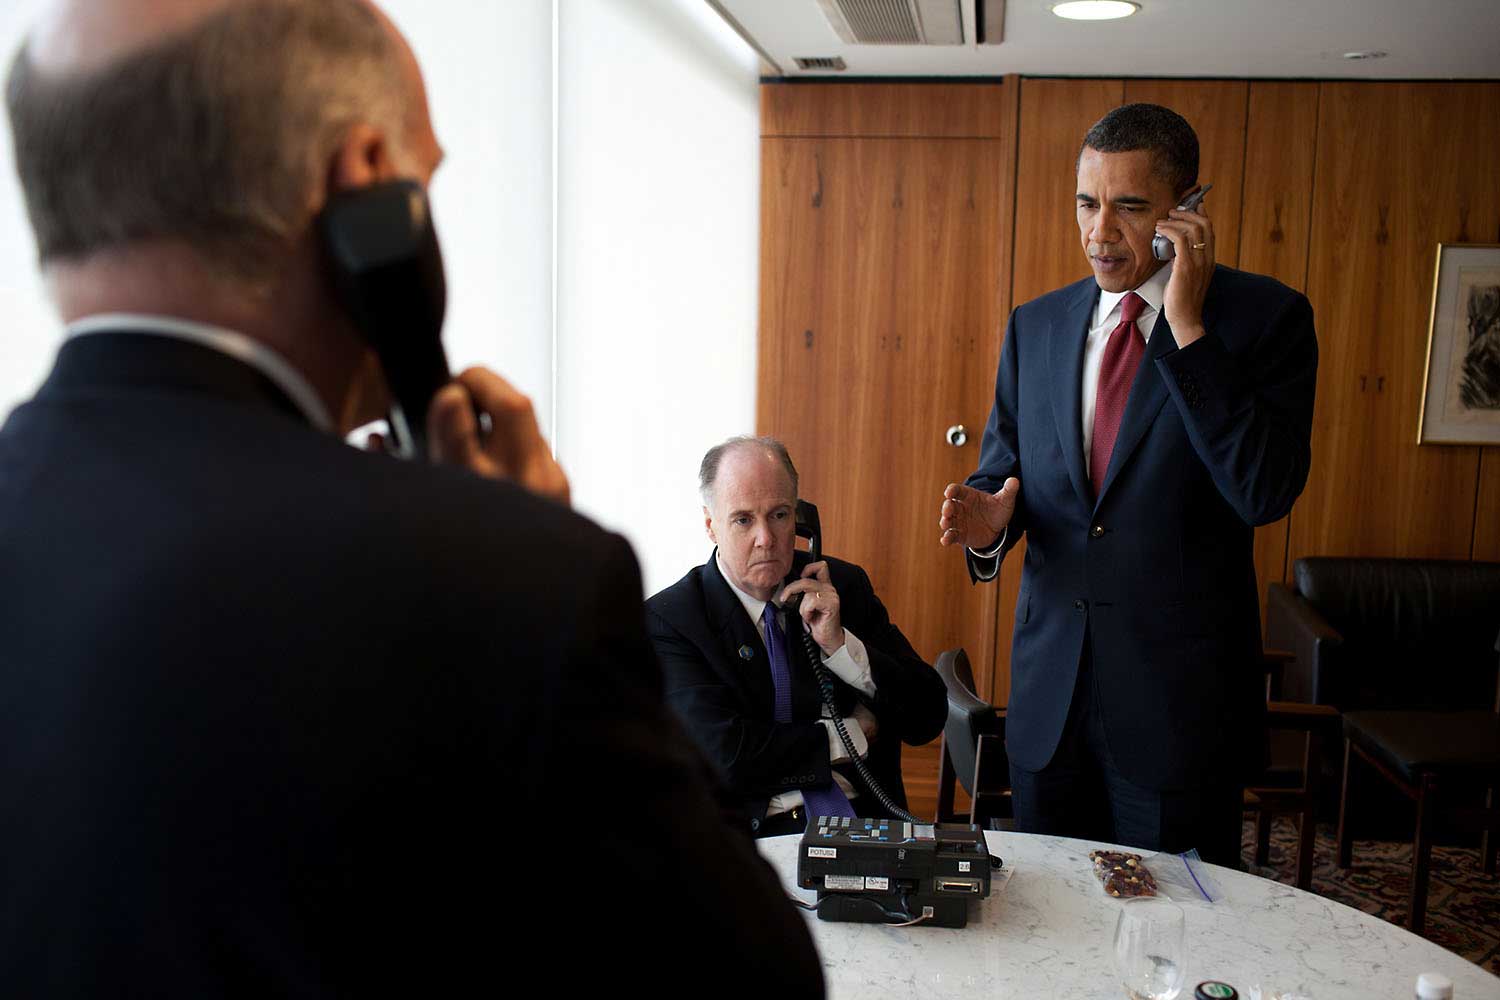 "The President gives the final authorization for the armed forces of the United States to begin a limited military action in Libya in support of an international effort to protect Libyan civilians during a conference call in Brazil, March 19, 2011."